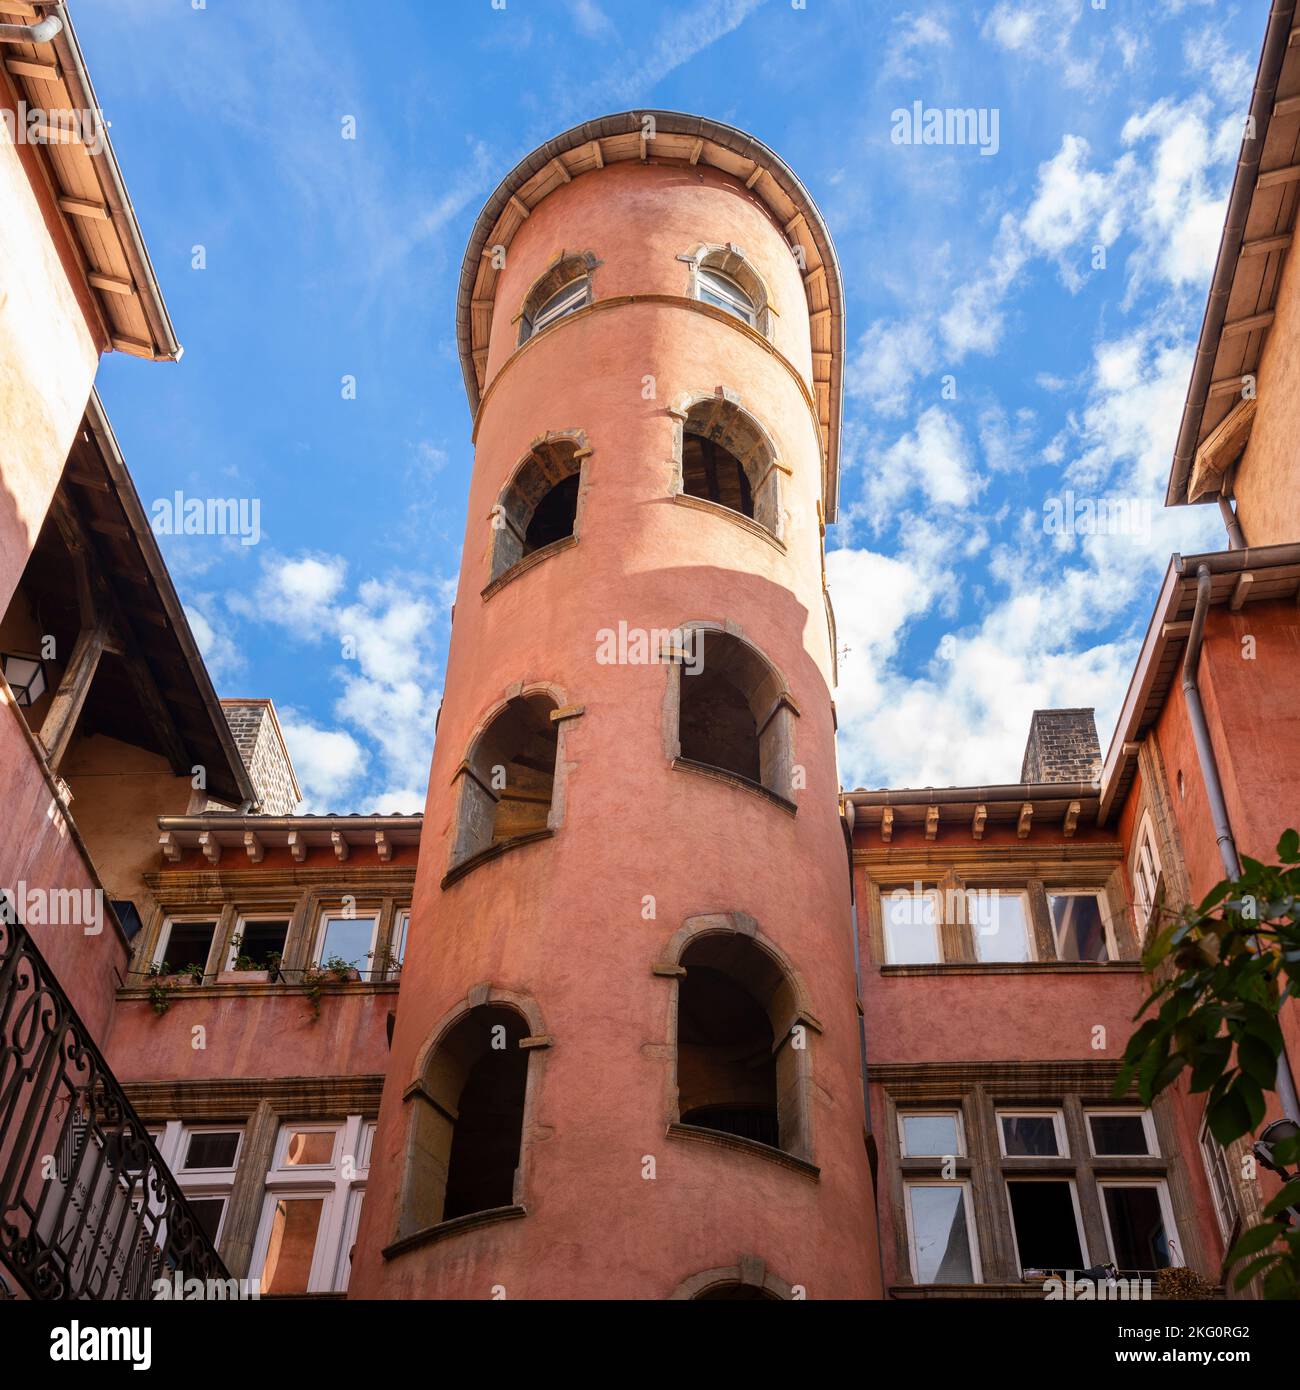 Famous building with pink tower in Lyon, France Stock Photo